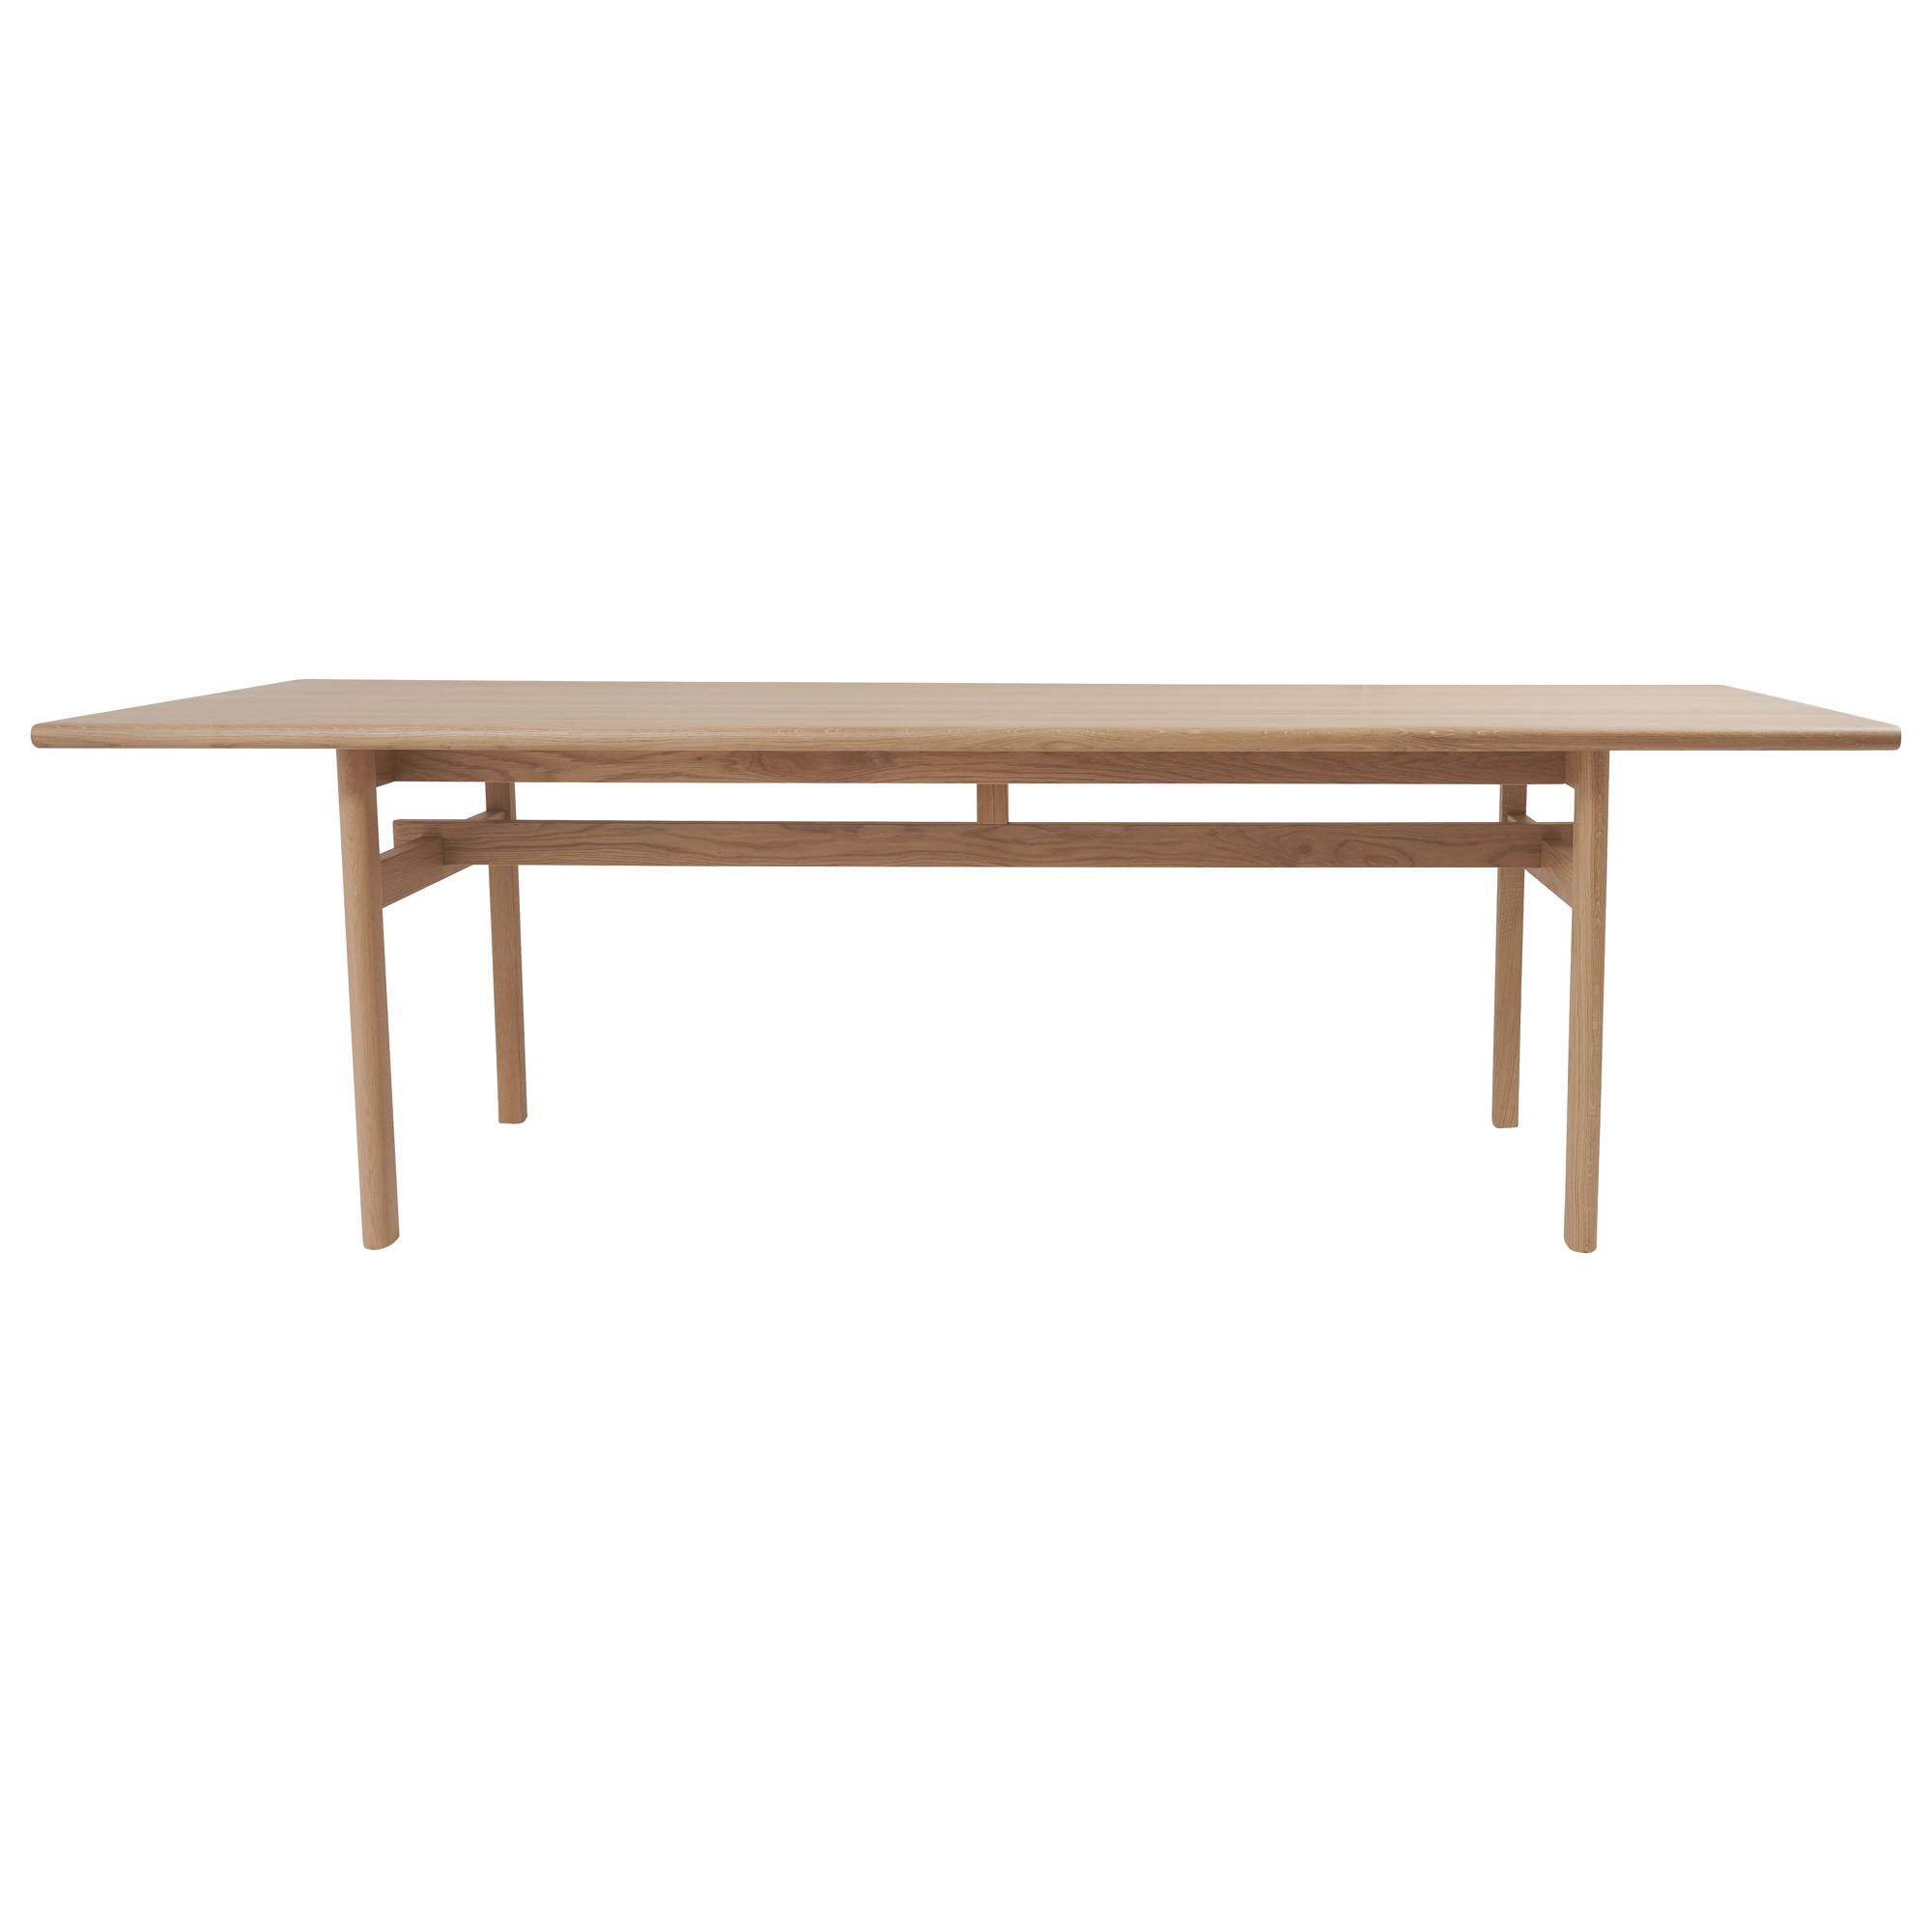 Schumacher Editions Mokki 94.5" Dining Table in White Oak For Sale